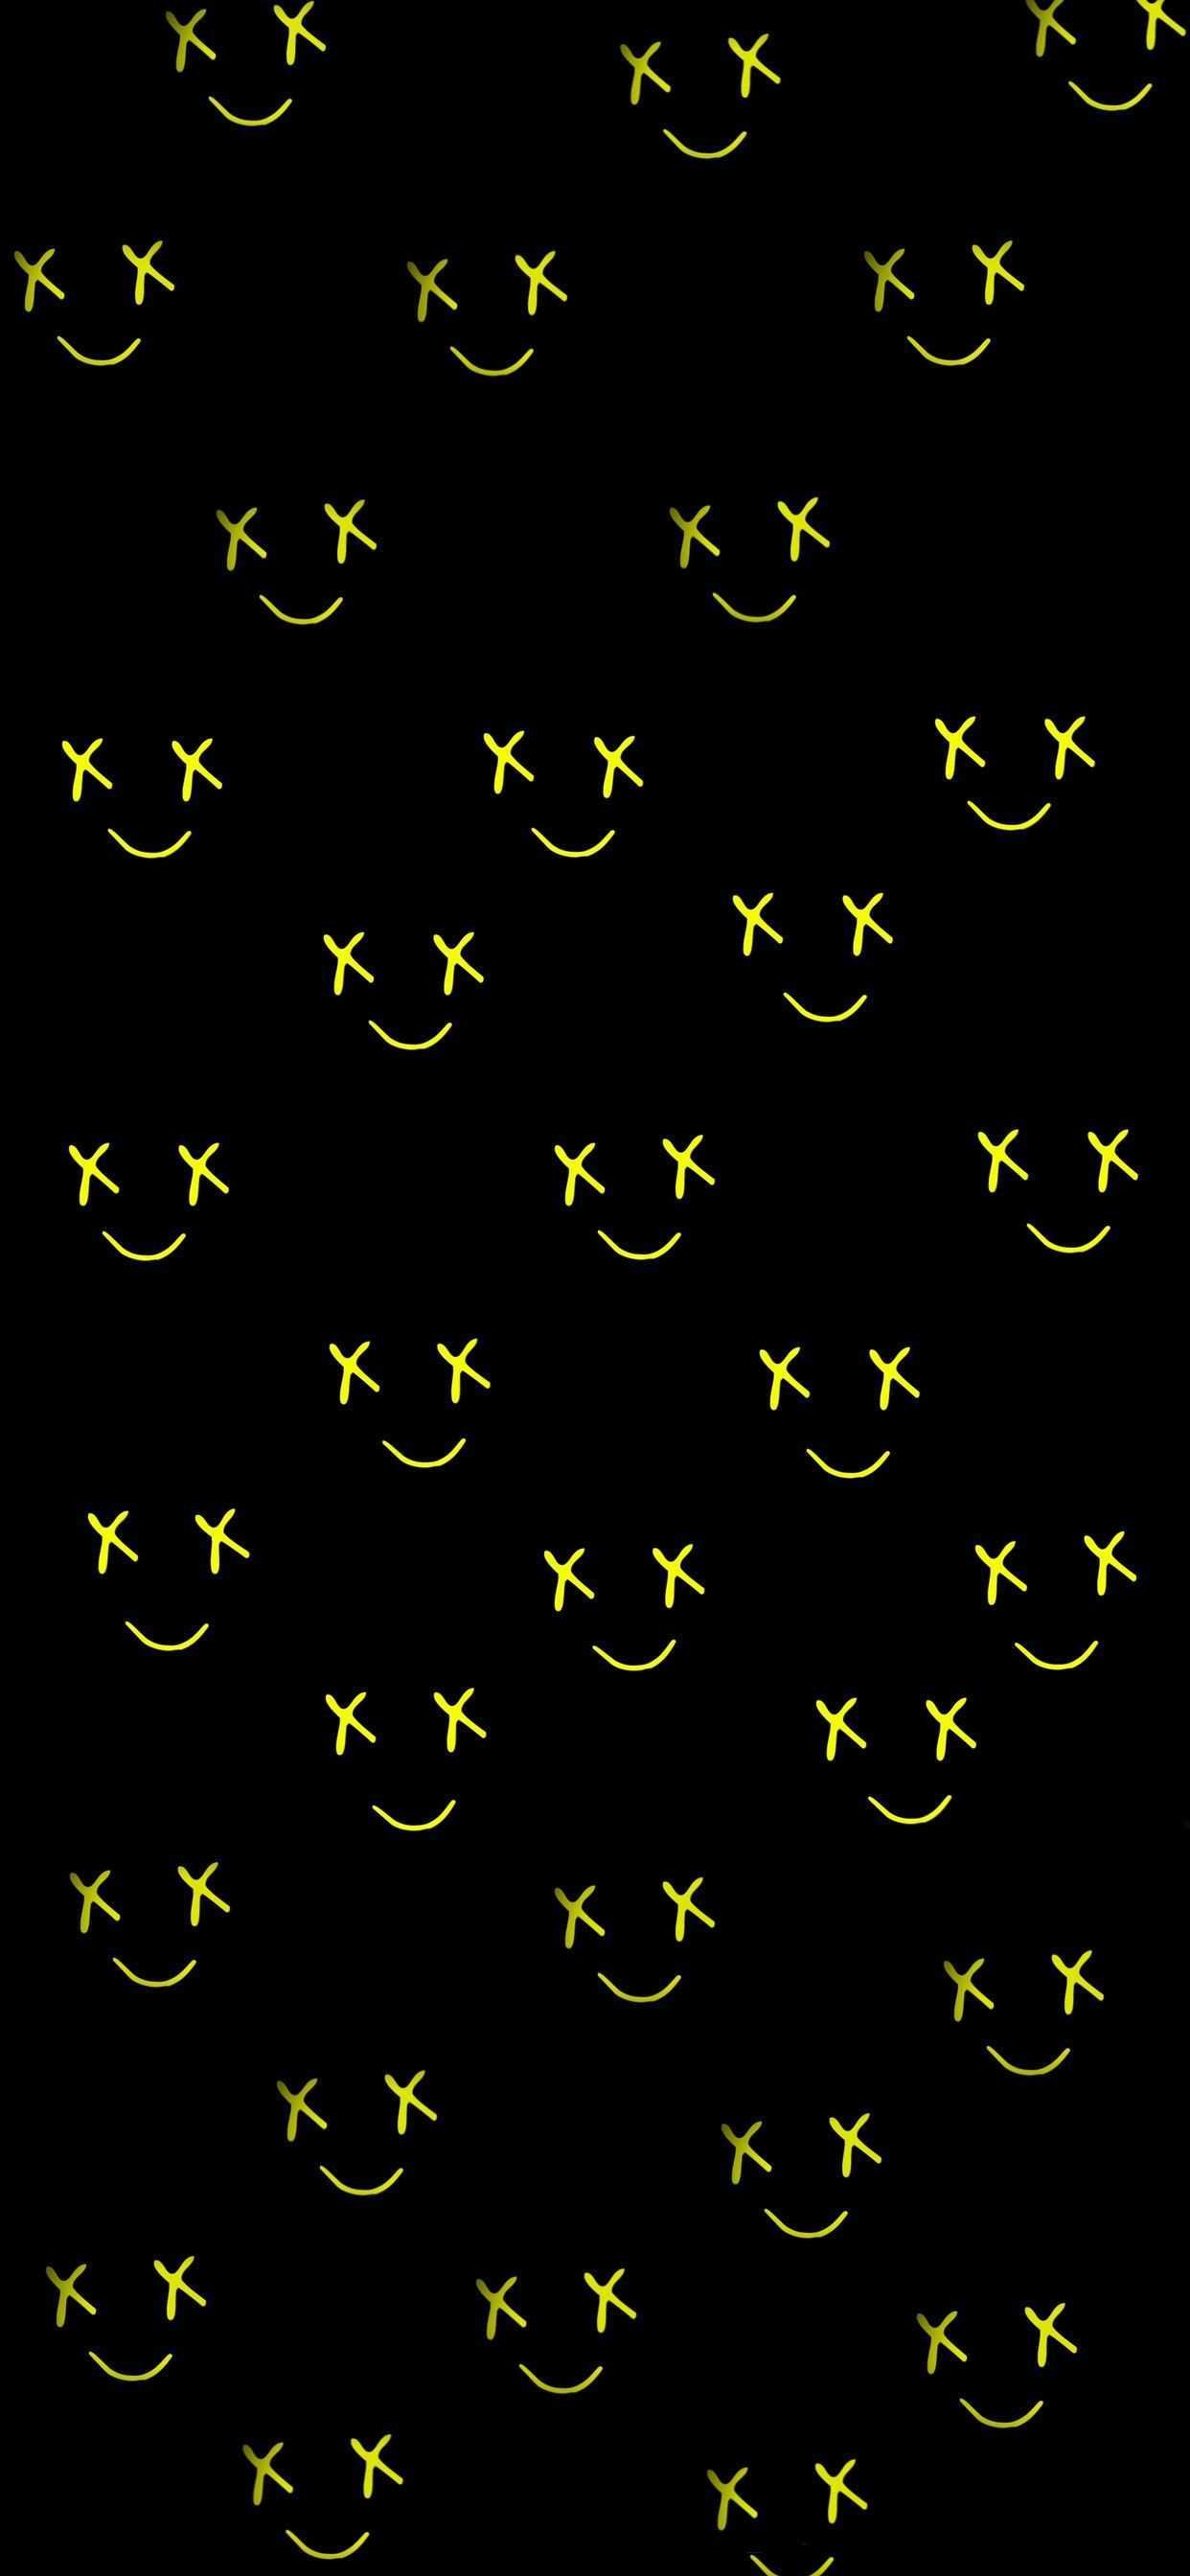 Smiley Face pattern